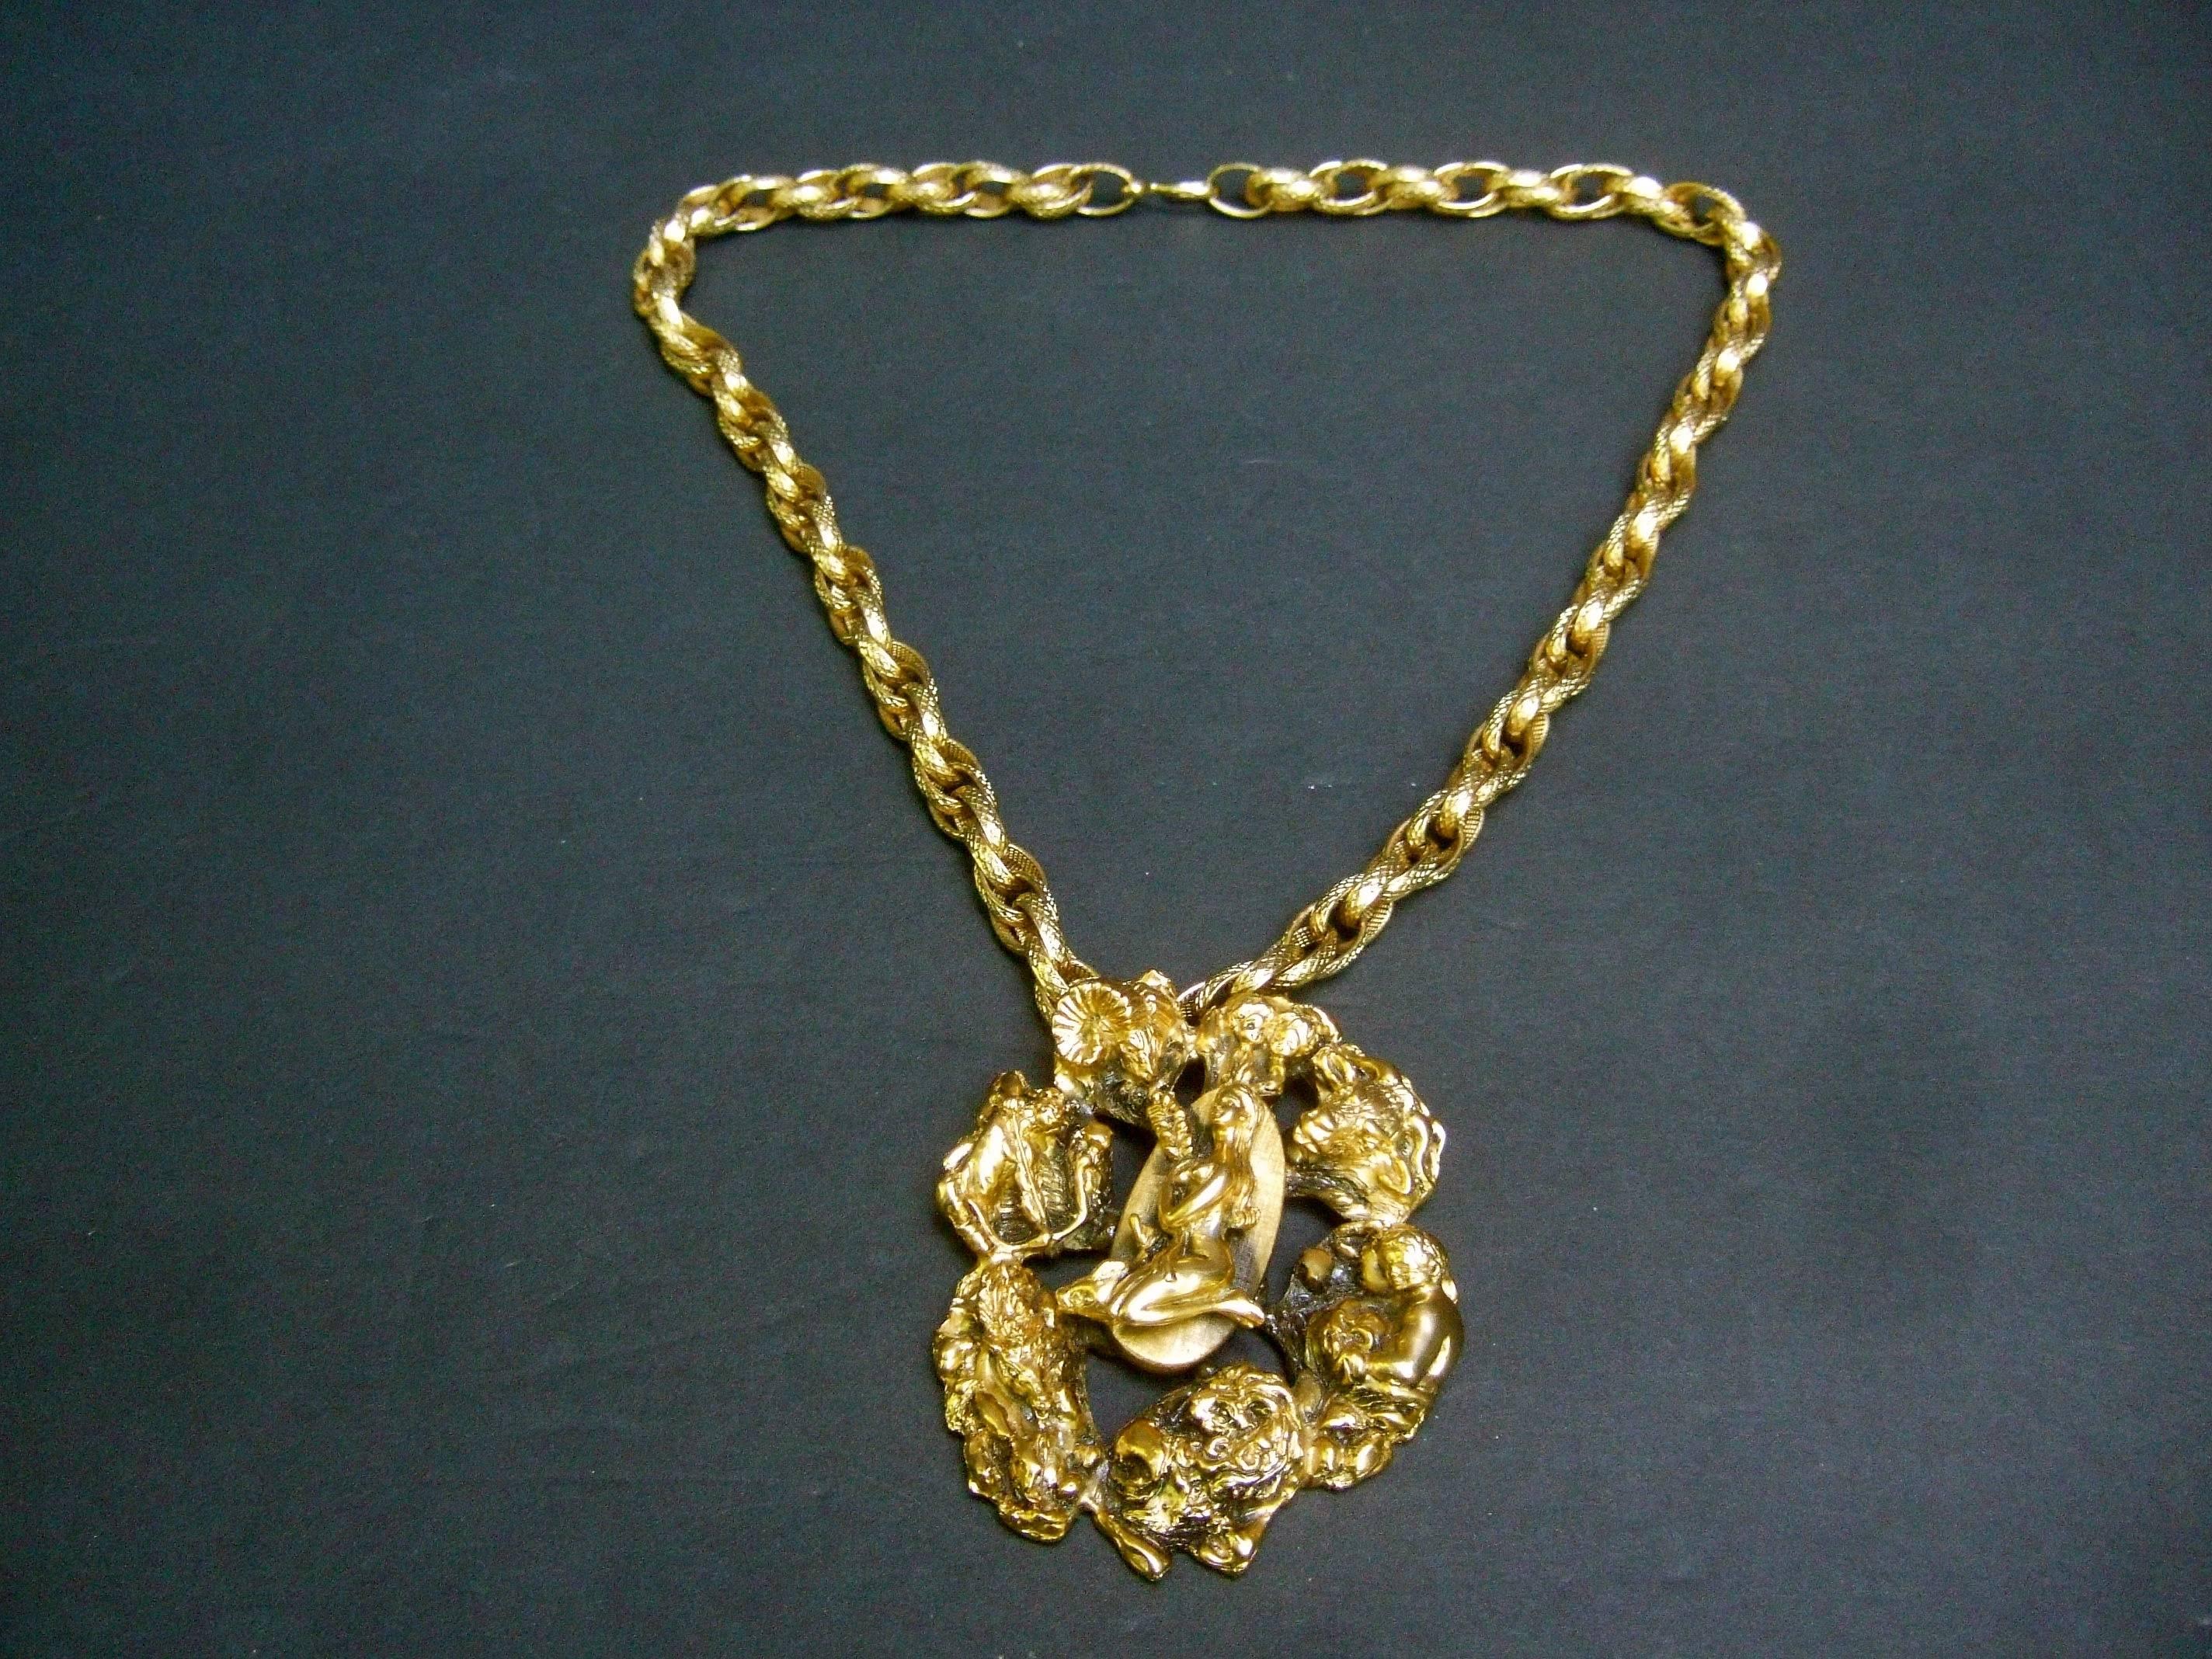 Massive gilt metal Virgo zodiac pendant necklace c 1970s 
The unique large scale pendant depicts eight 
of the astrological signs 

The center of the pendant features the female
figure for Virgo. She is surrounded by a series 
of the other